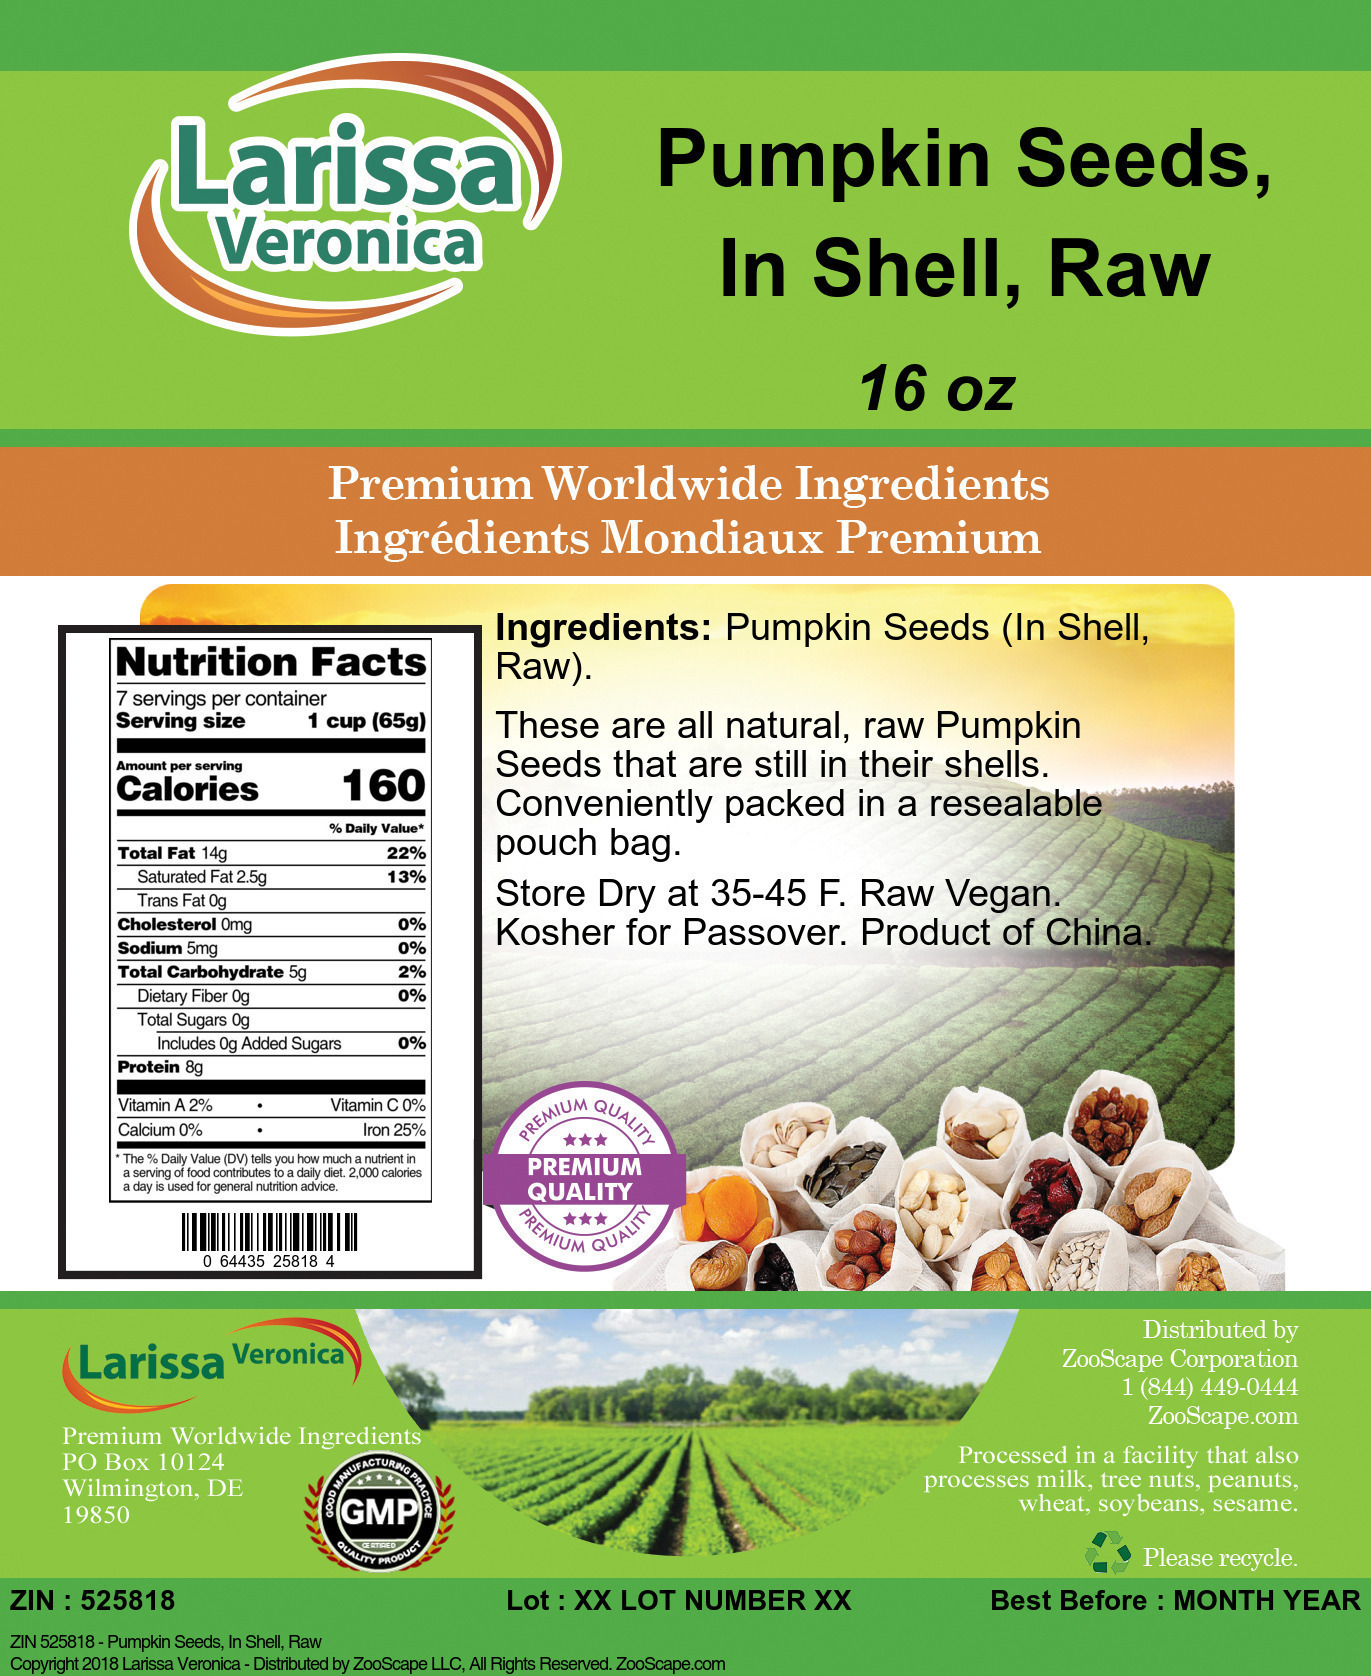 Pumpkin Seeds, In Shell, Raw - Label